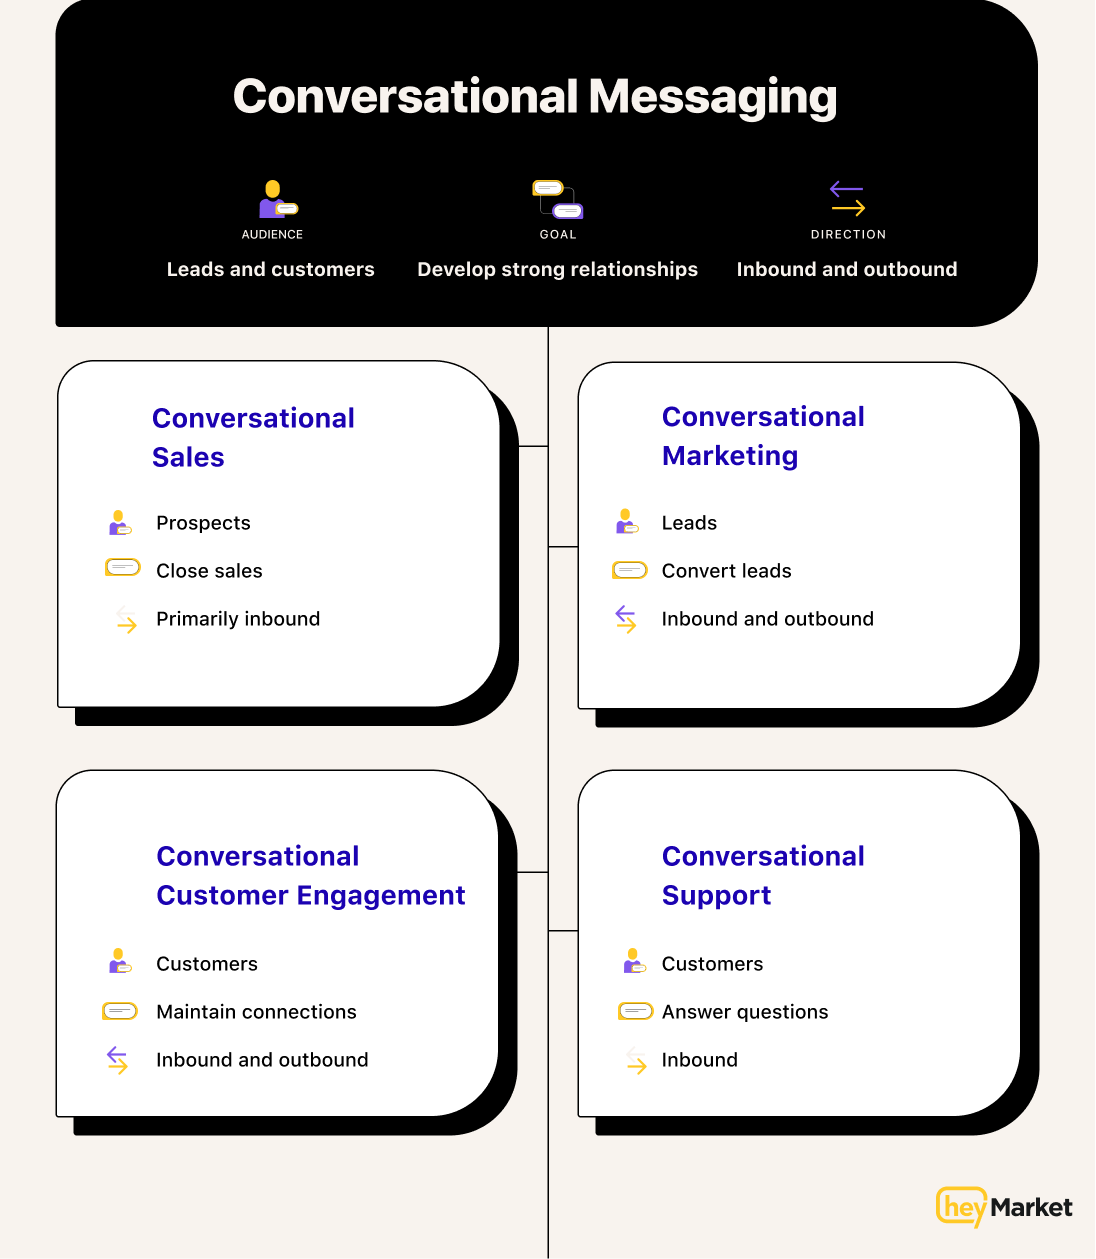 Chart showing different types of conversational messaging that businesses can use.